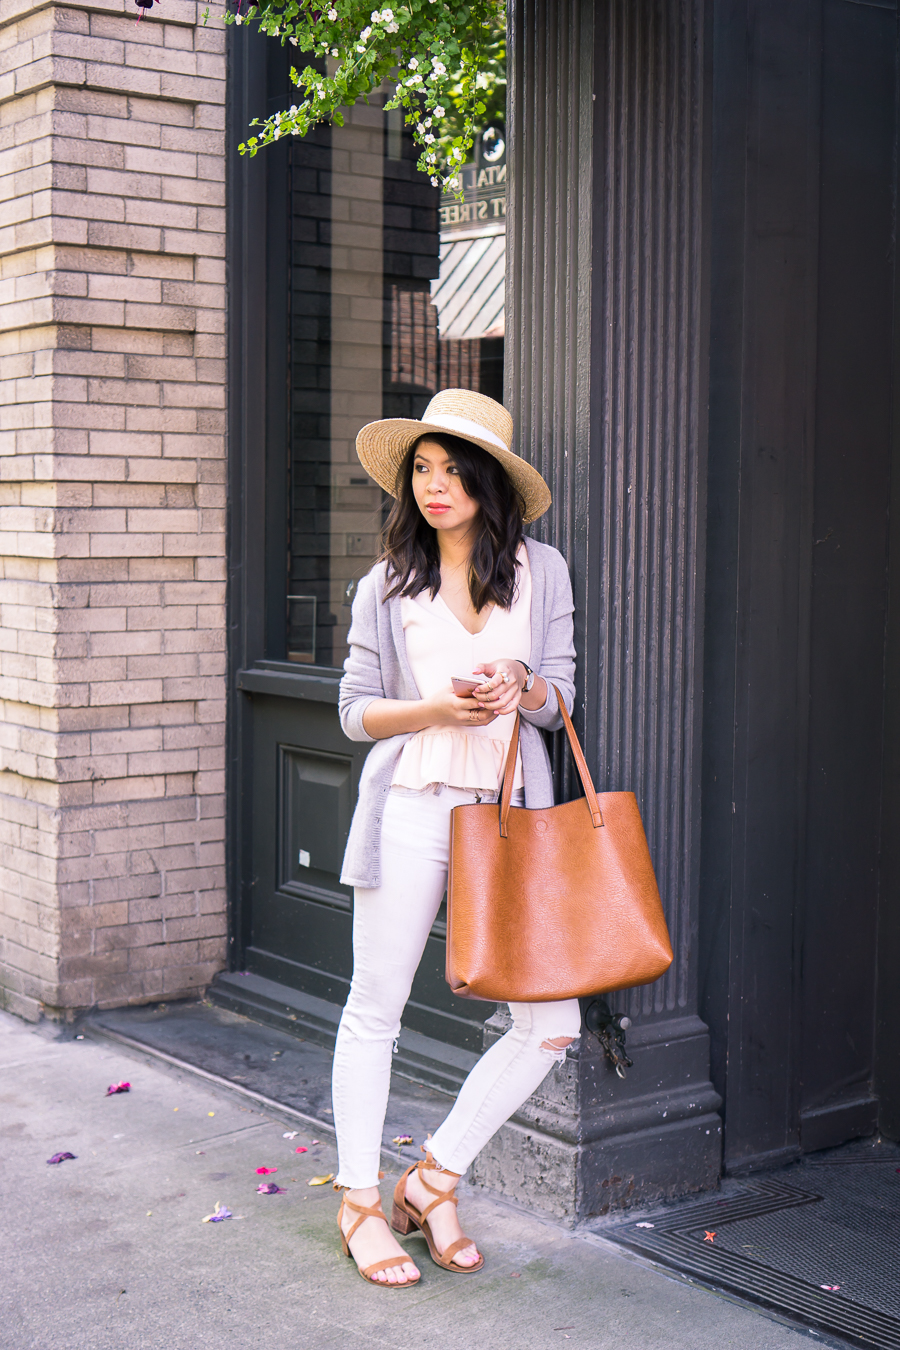 Summer outfit with cashmere cardigan sweater, ruffle tank with raw edge, suede lace up sandals, skinny white jeans, and straw hat | Petite fashion blog